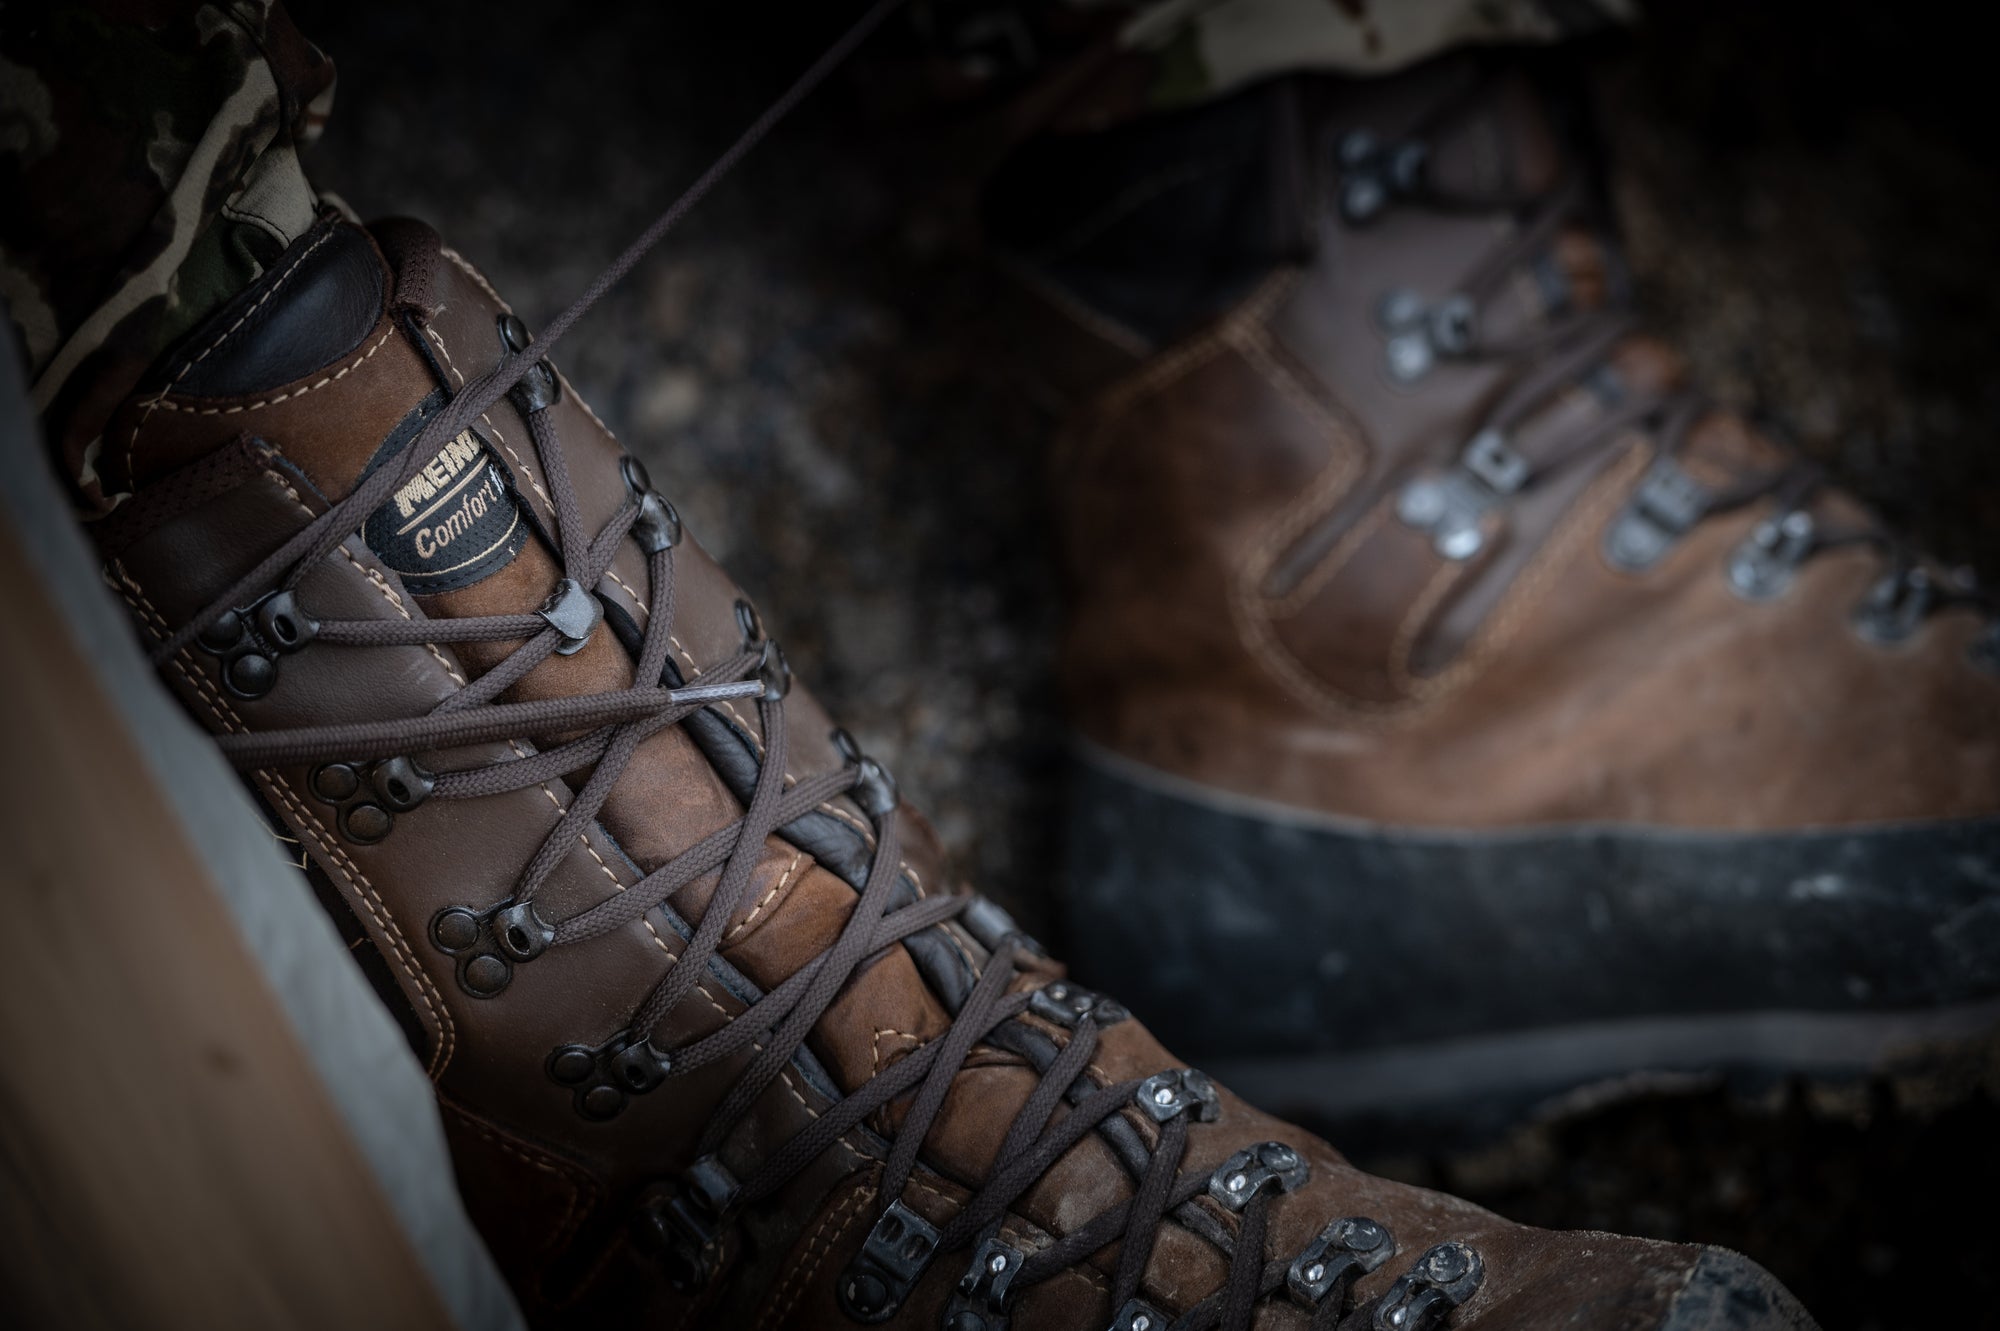 Shop Meindl's full collection of boot care and accessories.